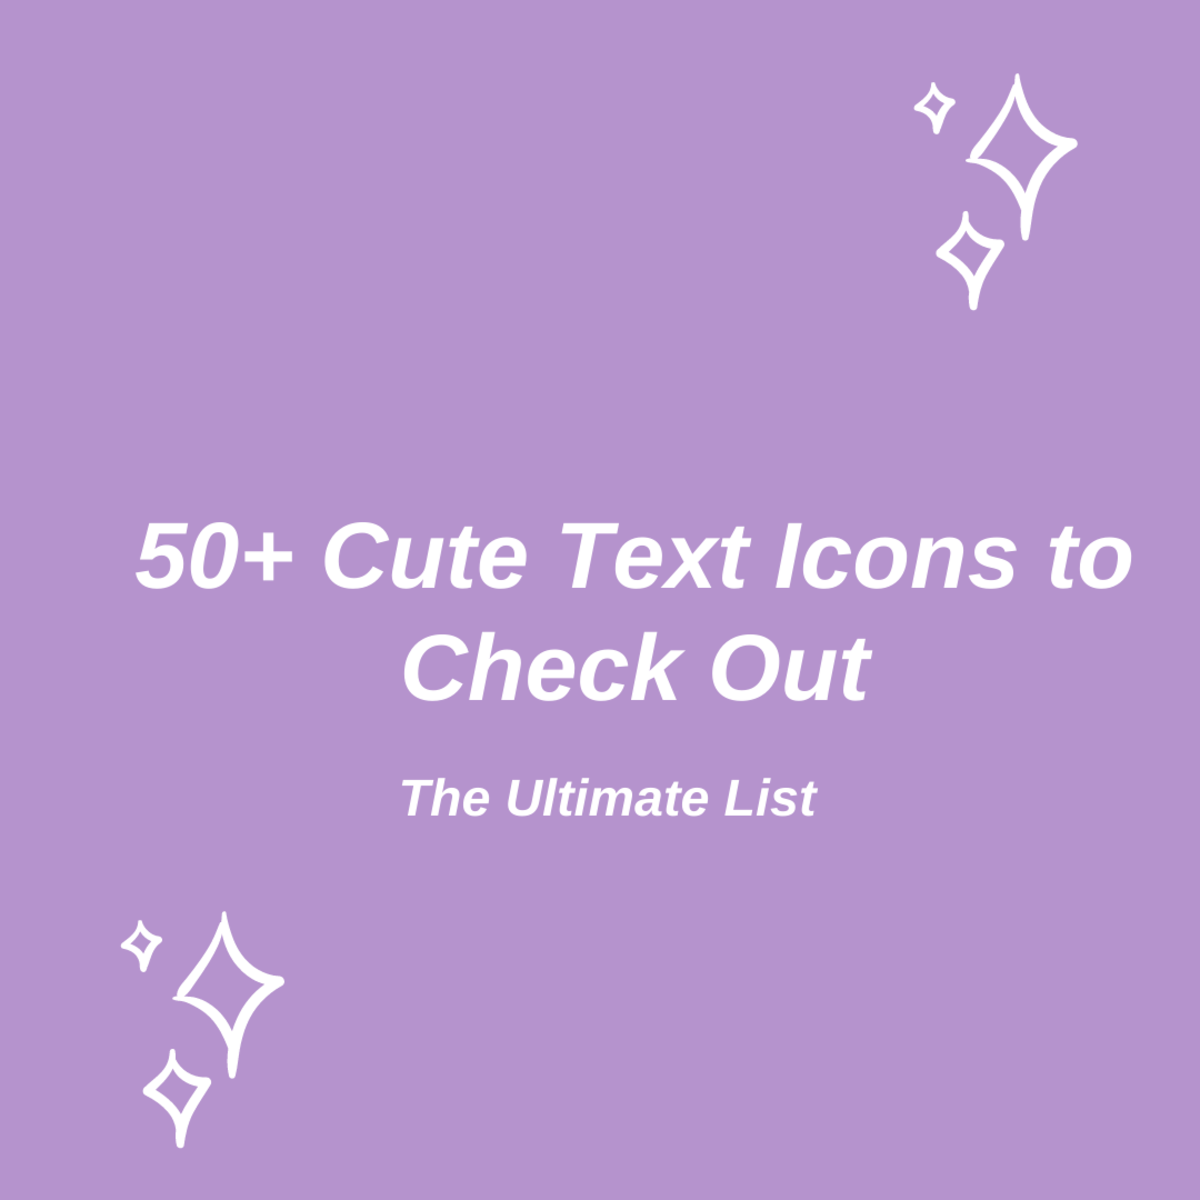 Discover over 50 super cute text icons and text symbols in this ultimate list!